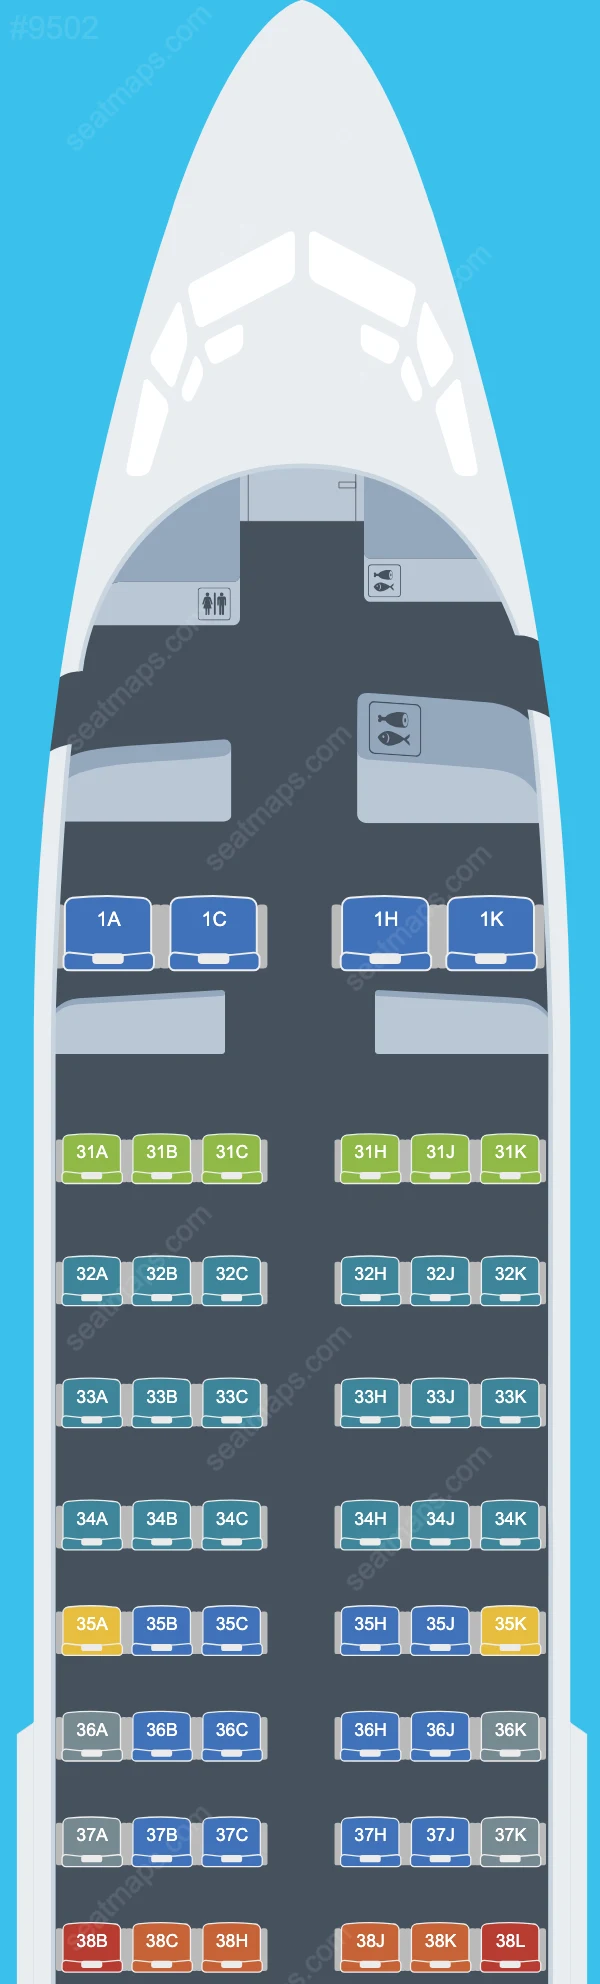 China Southern Boeing 737 Seat Maps 737-700 V.2